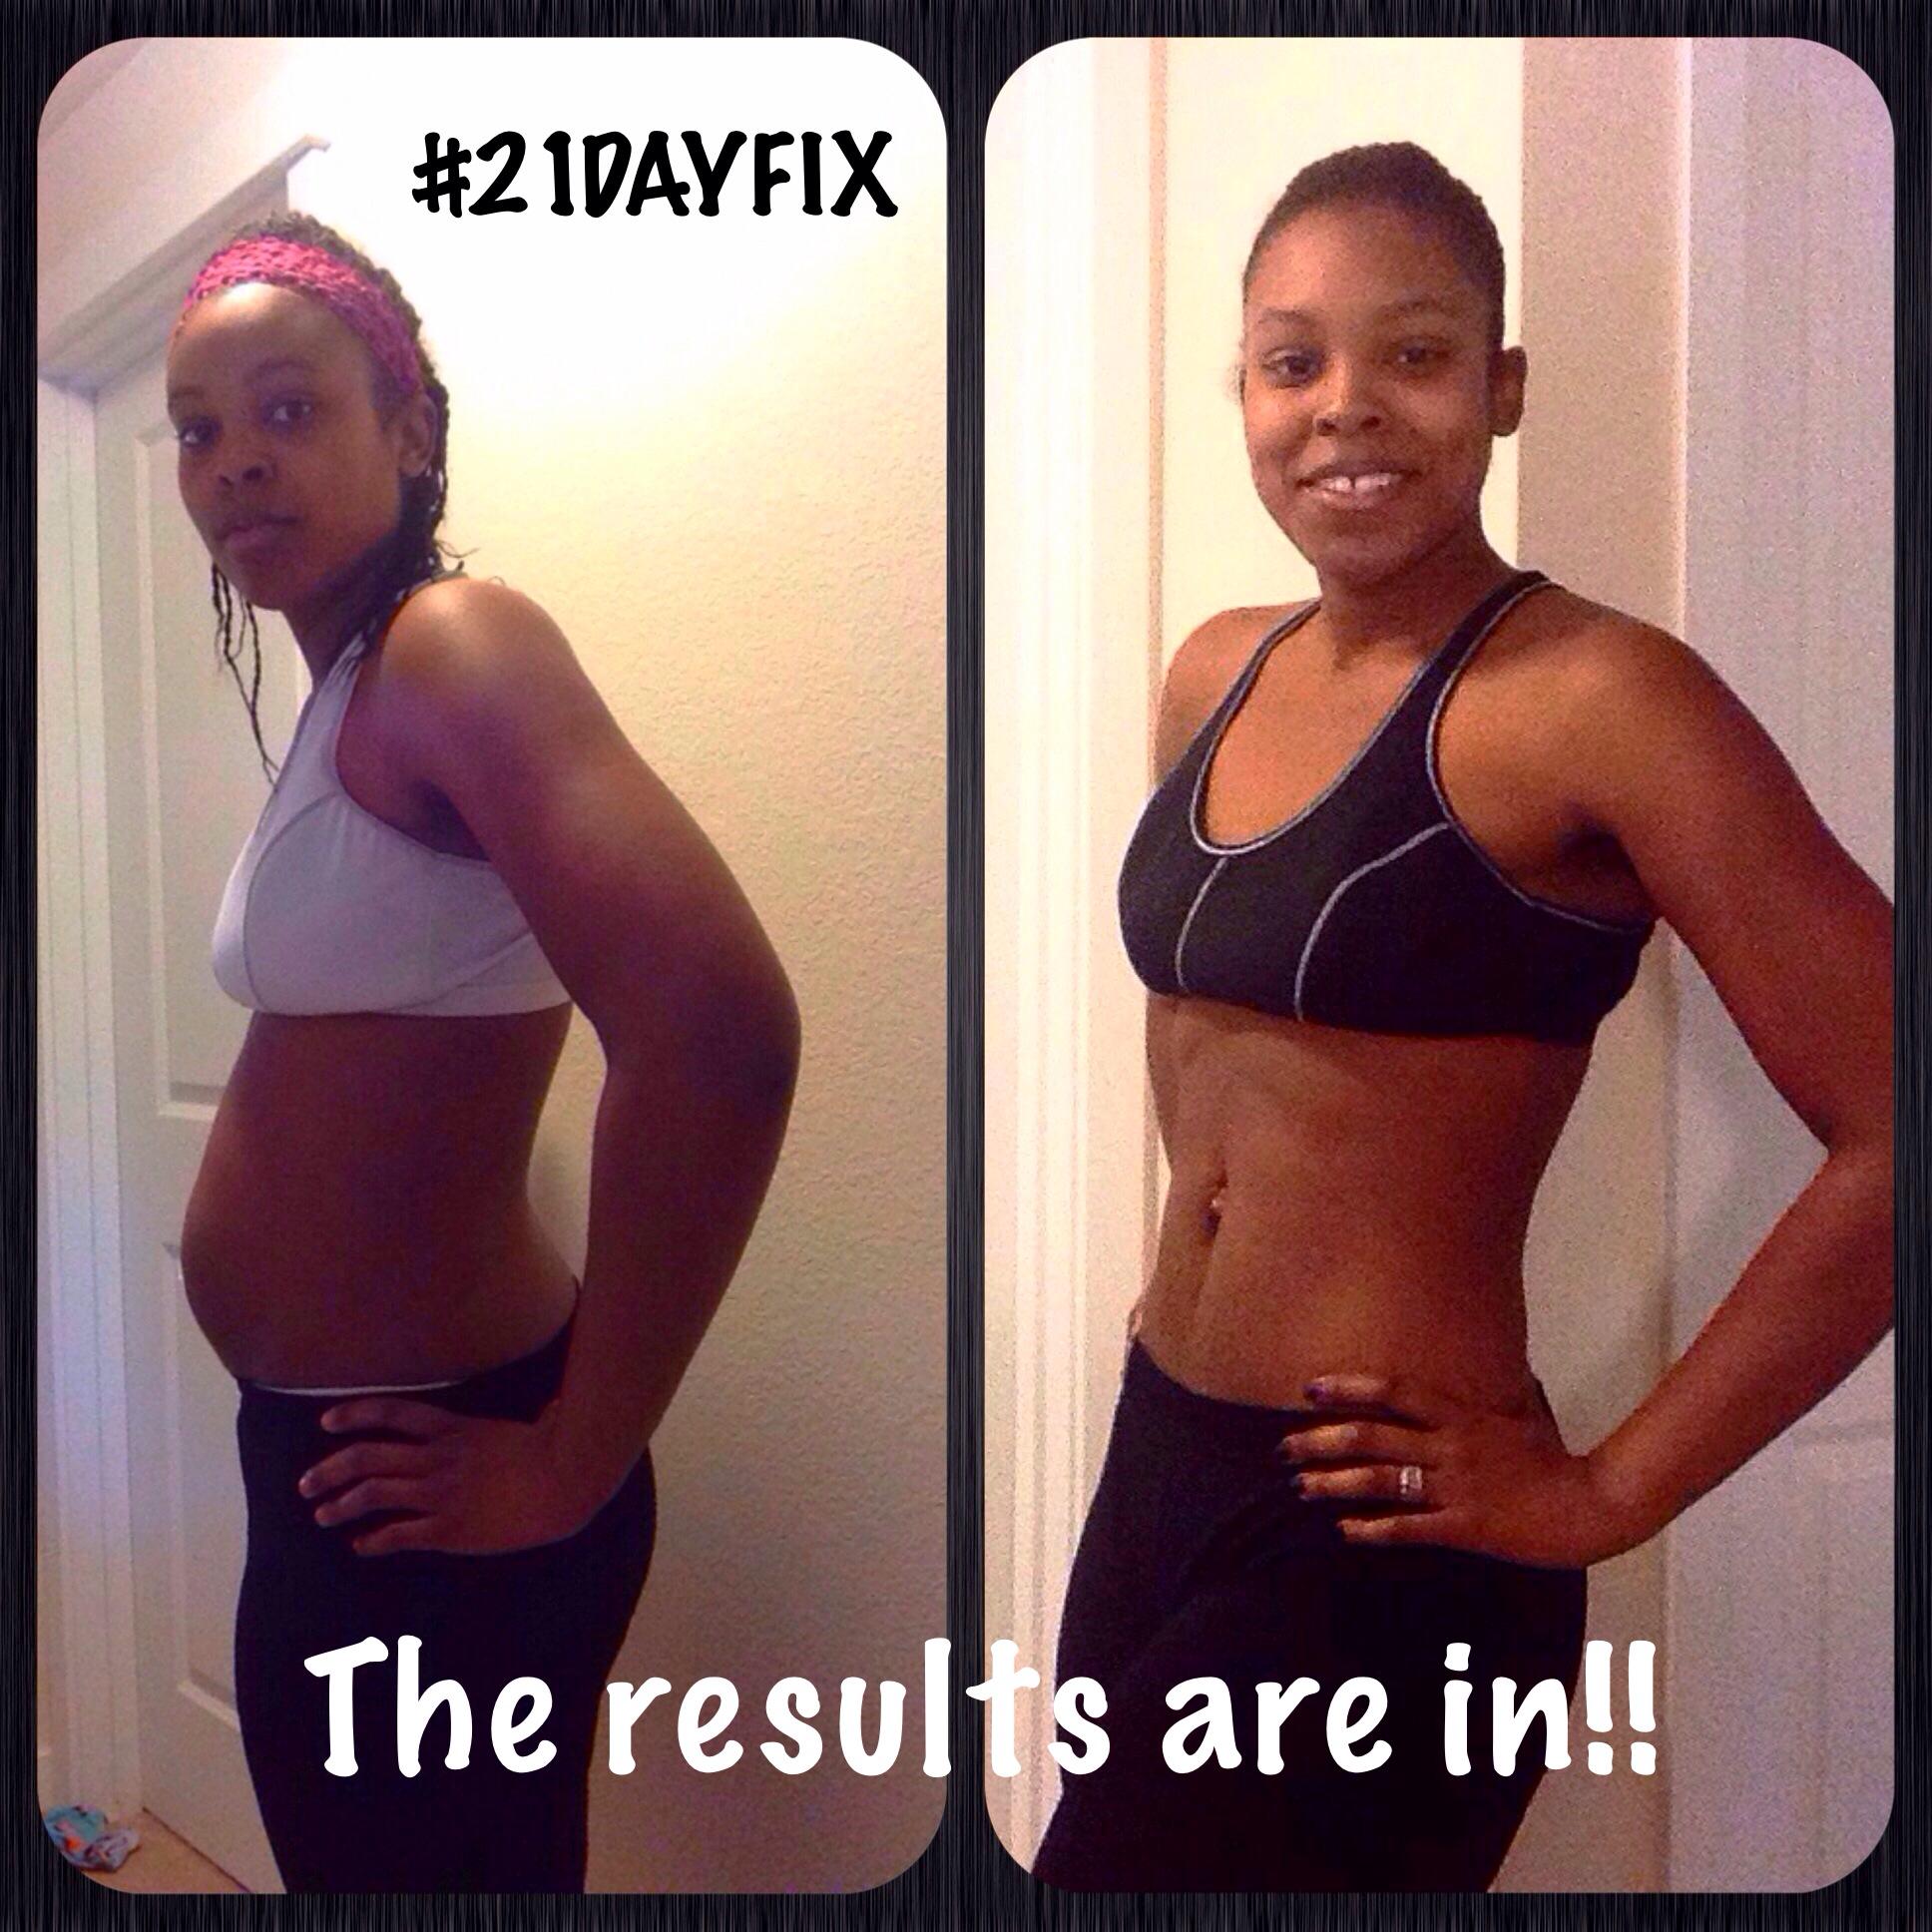 Does the 21 Day Fix Work